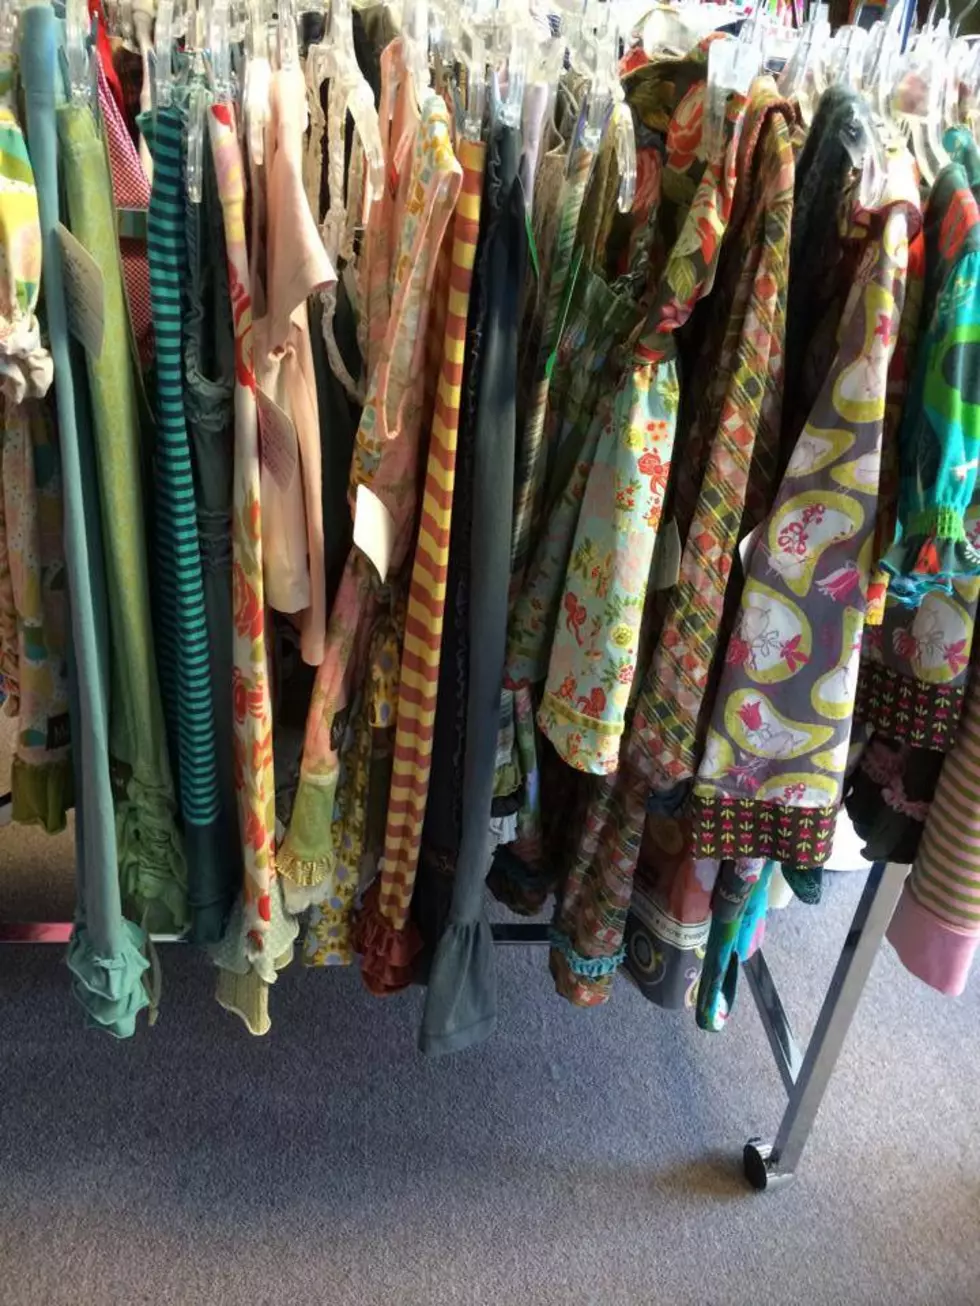 Here Are The Best Winter Clearance Consignment Sales In Owensboro This Weekend[LIST]